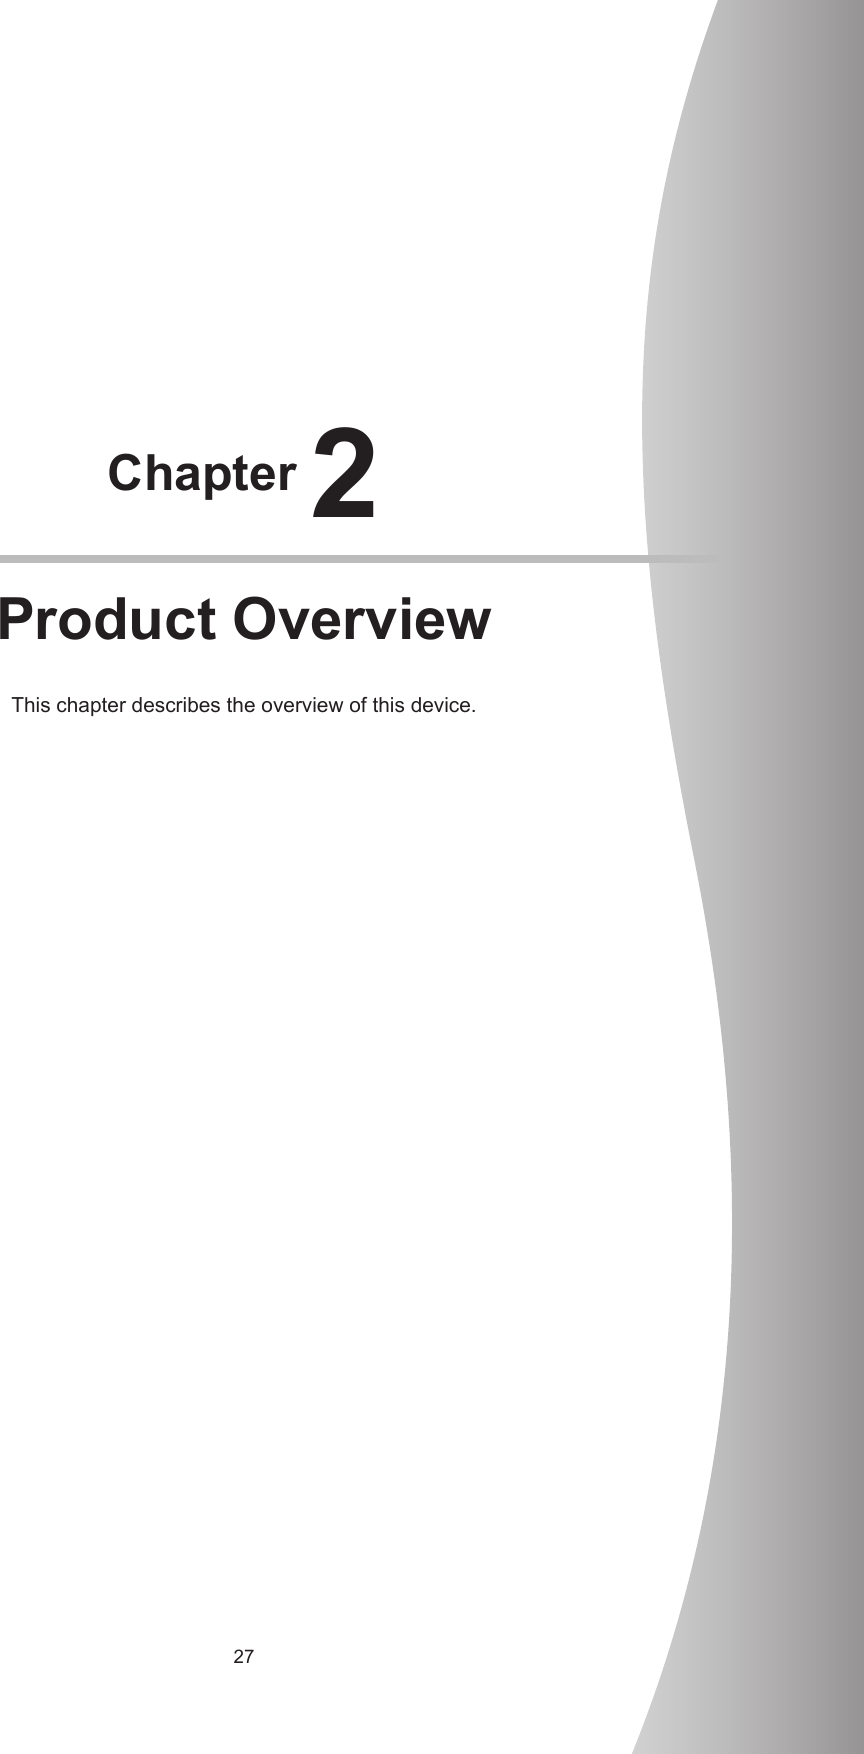 27Chapter 2Product OverviewThis chapter describes the overview of this device.